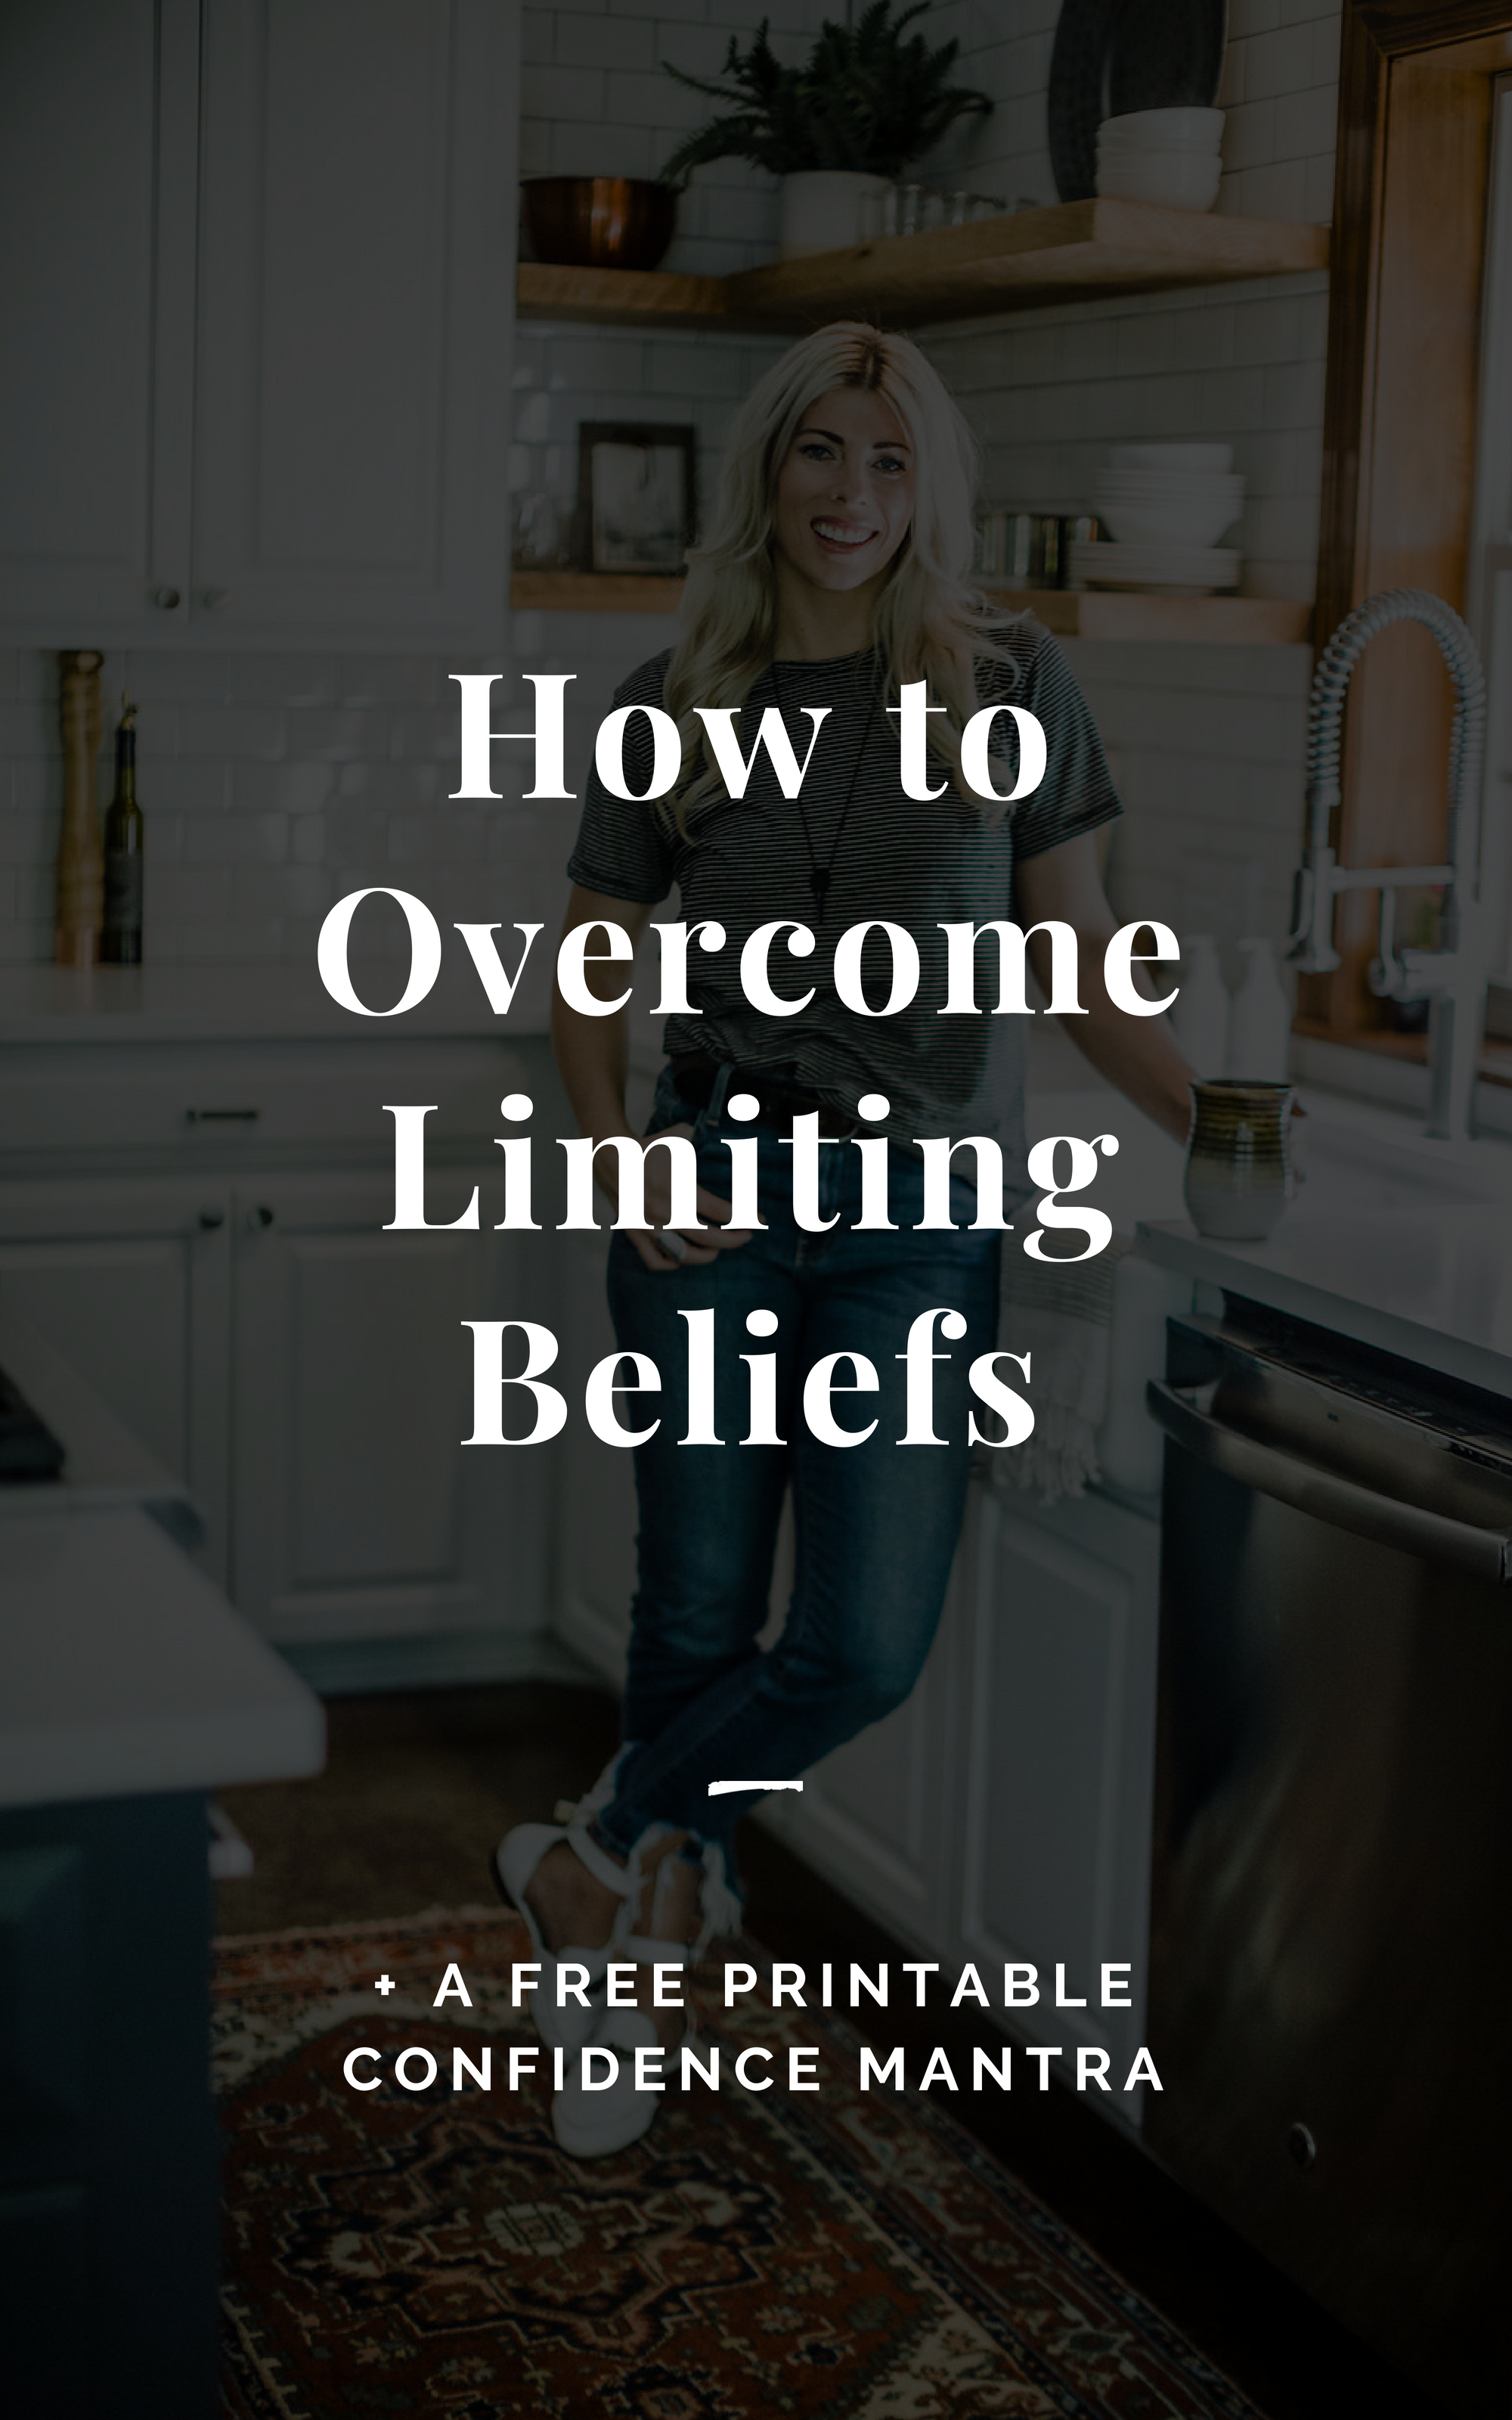 How to overcome limiting beliefs